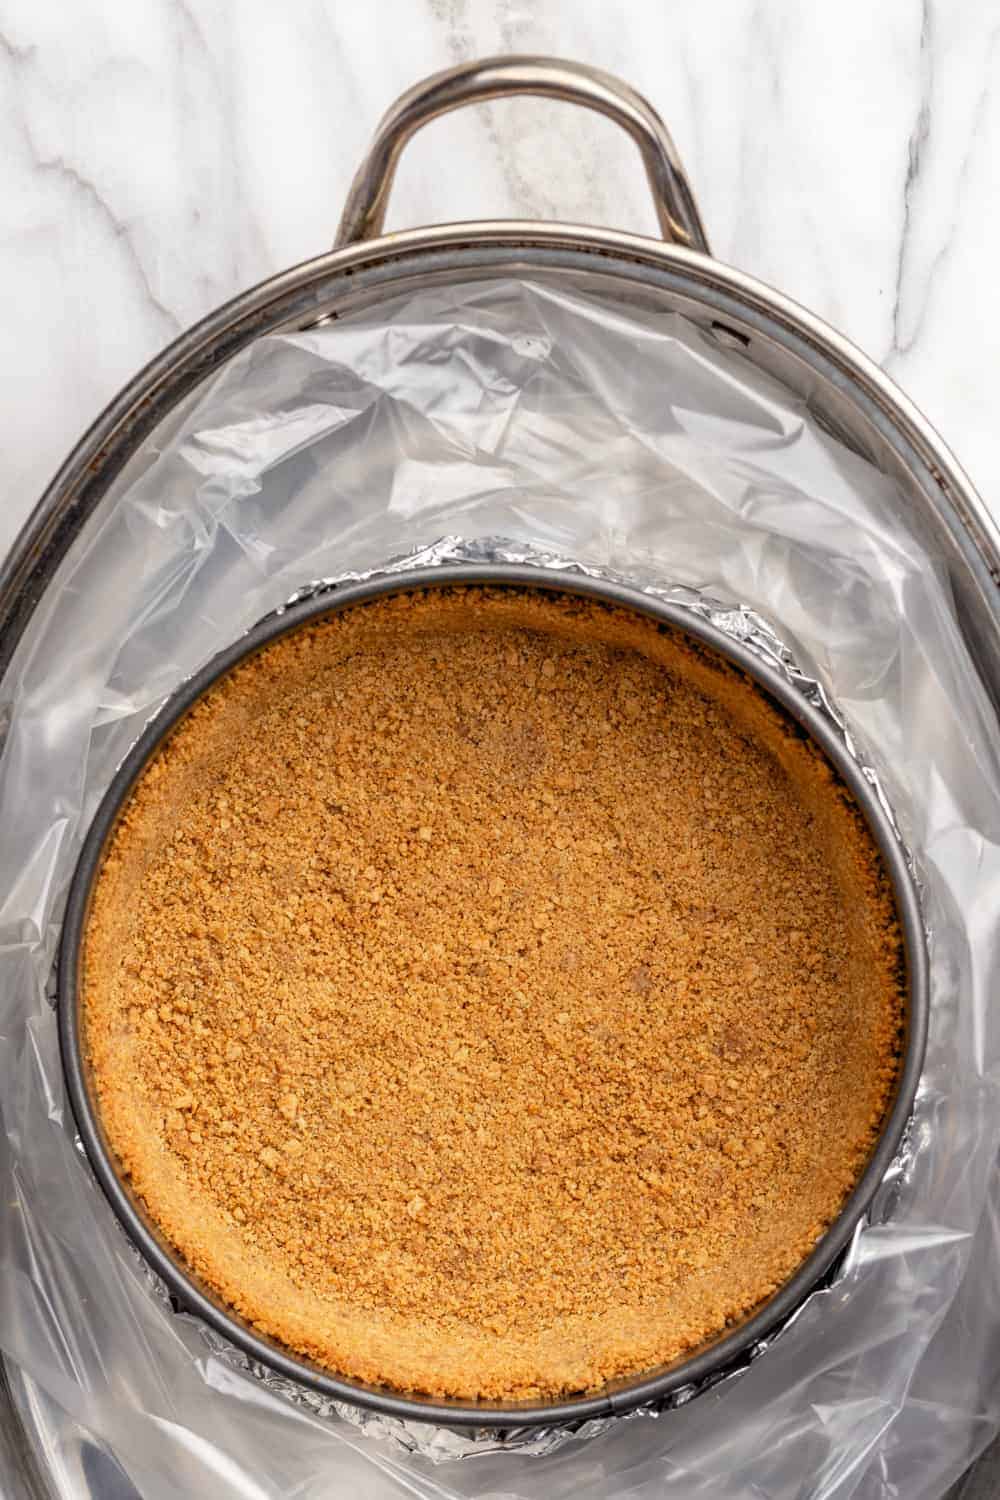 Graham cracker crust in a roasting pan, ready for filling and a water bath